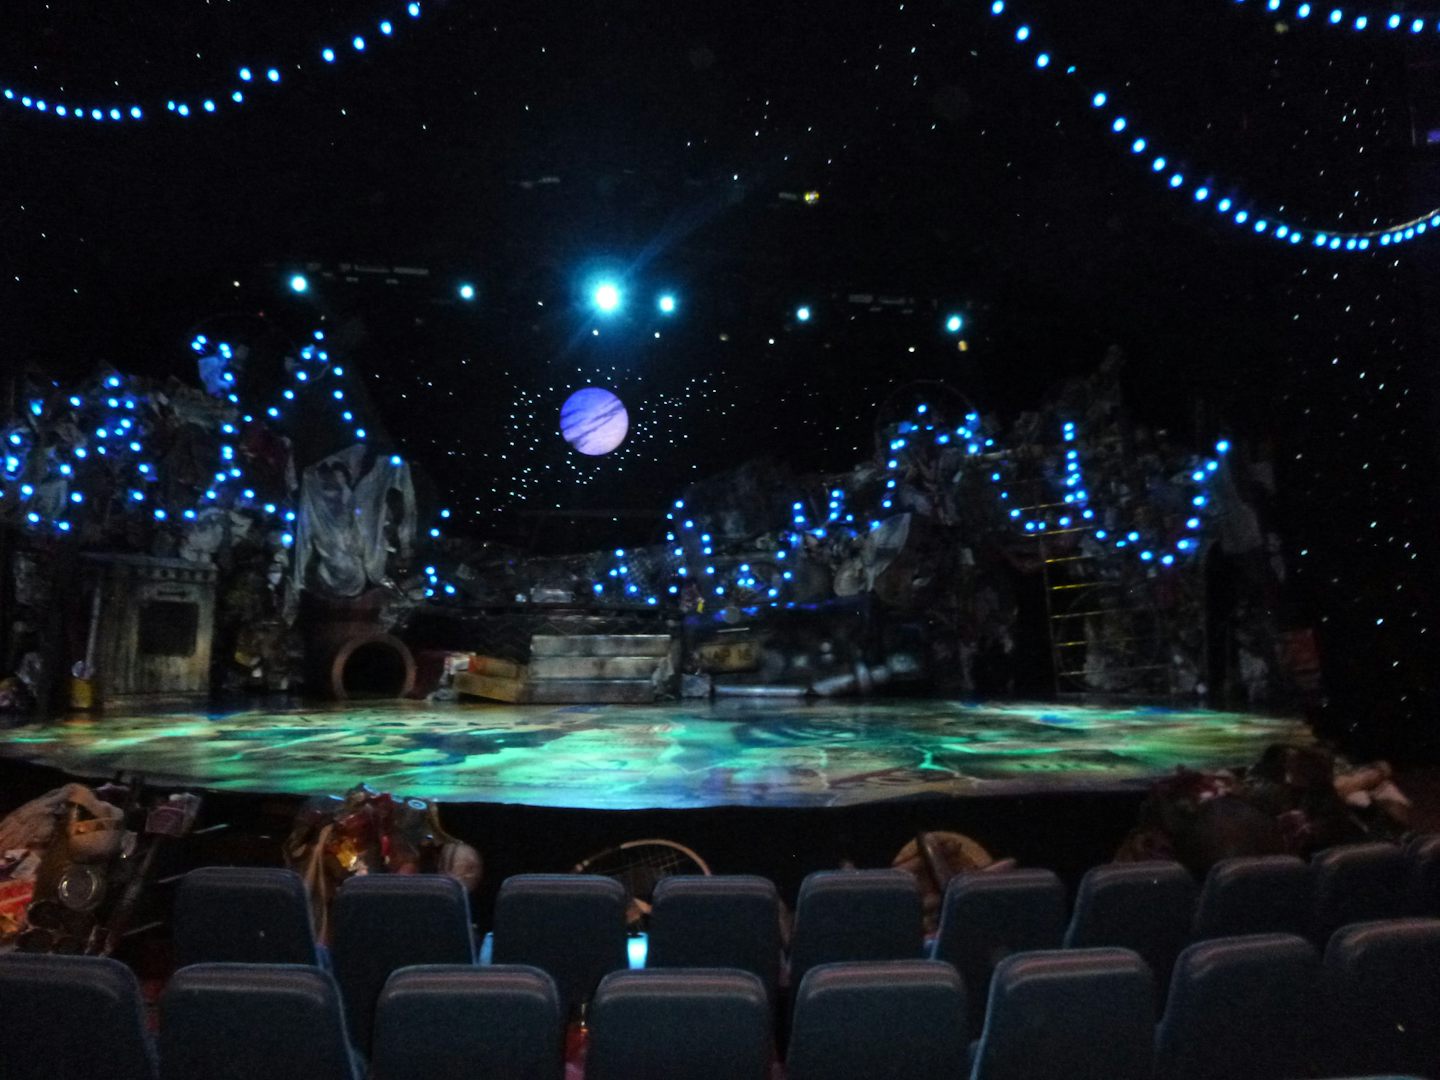 The stage for the musical CATS, taken during intermission